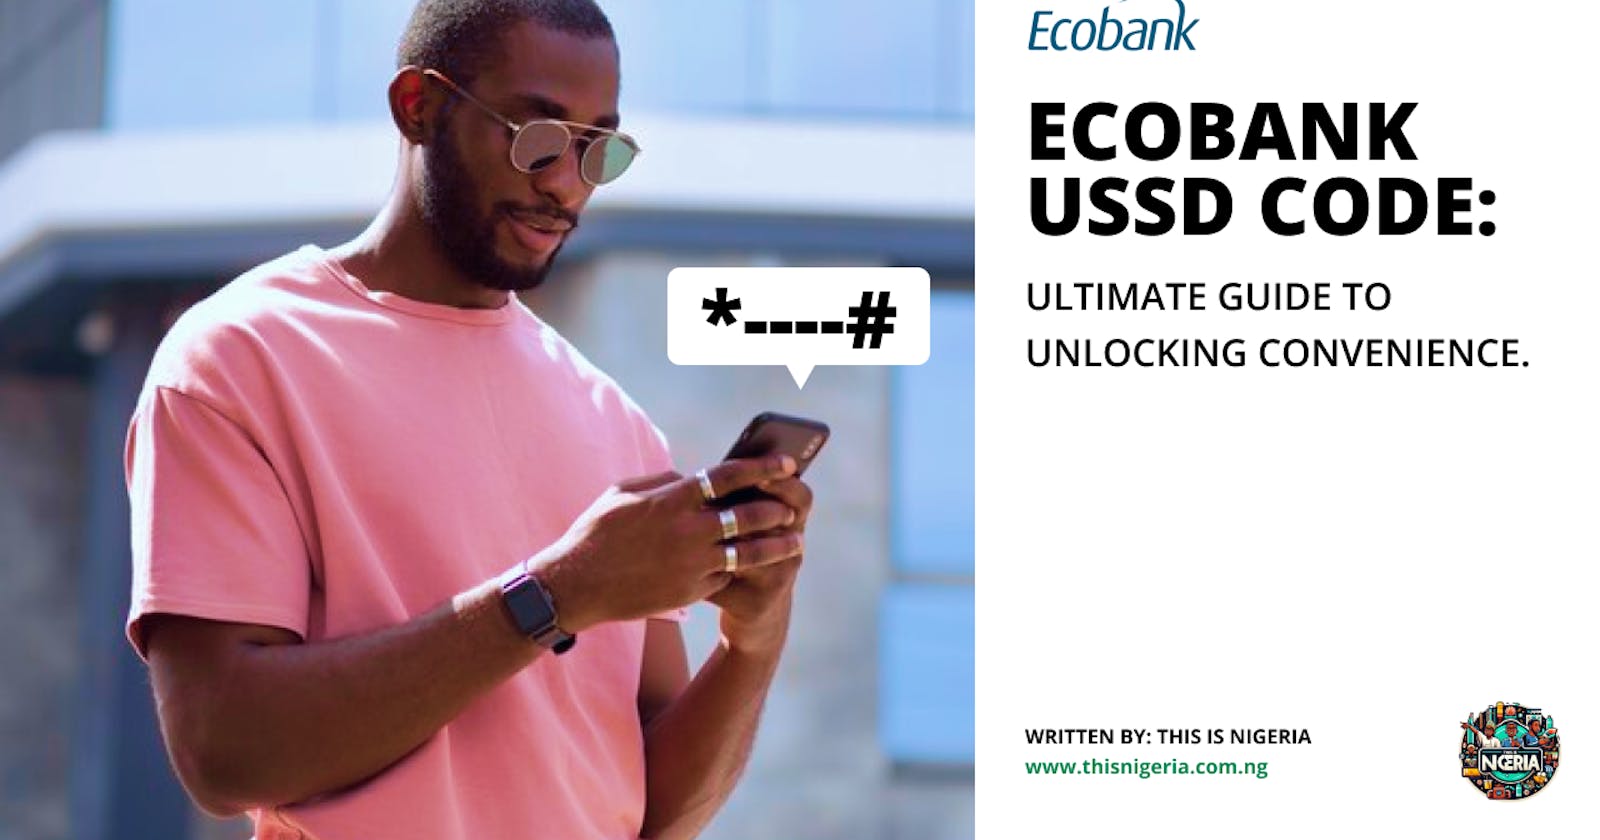 Ecobank USSD Code: Ultimate Guide to Unlocking Convenience.